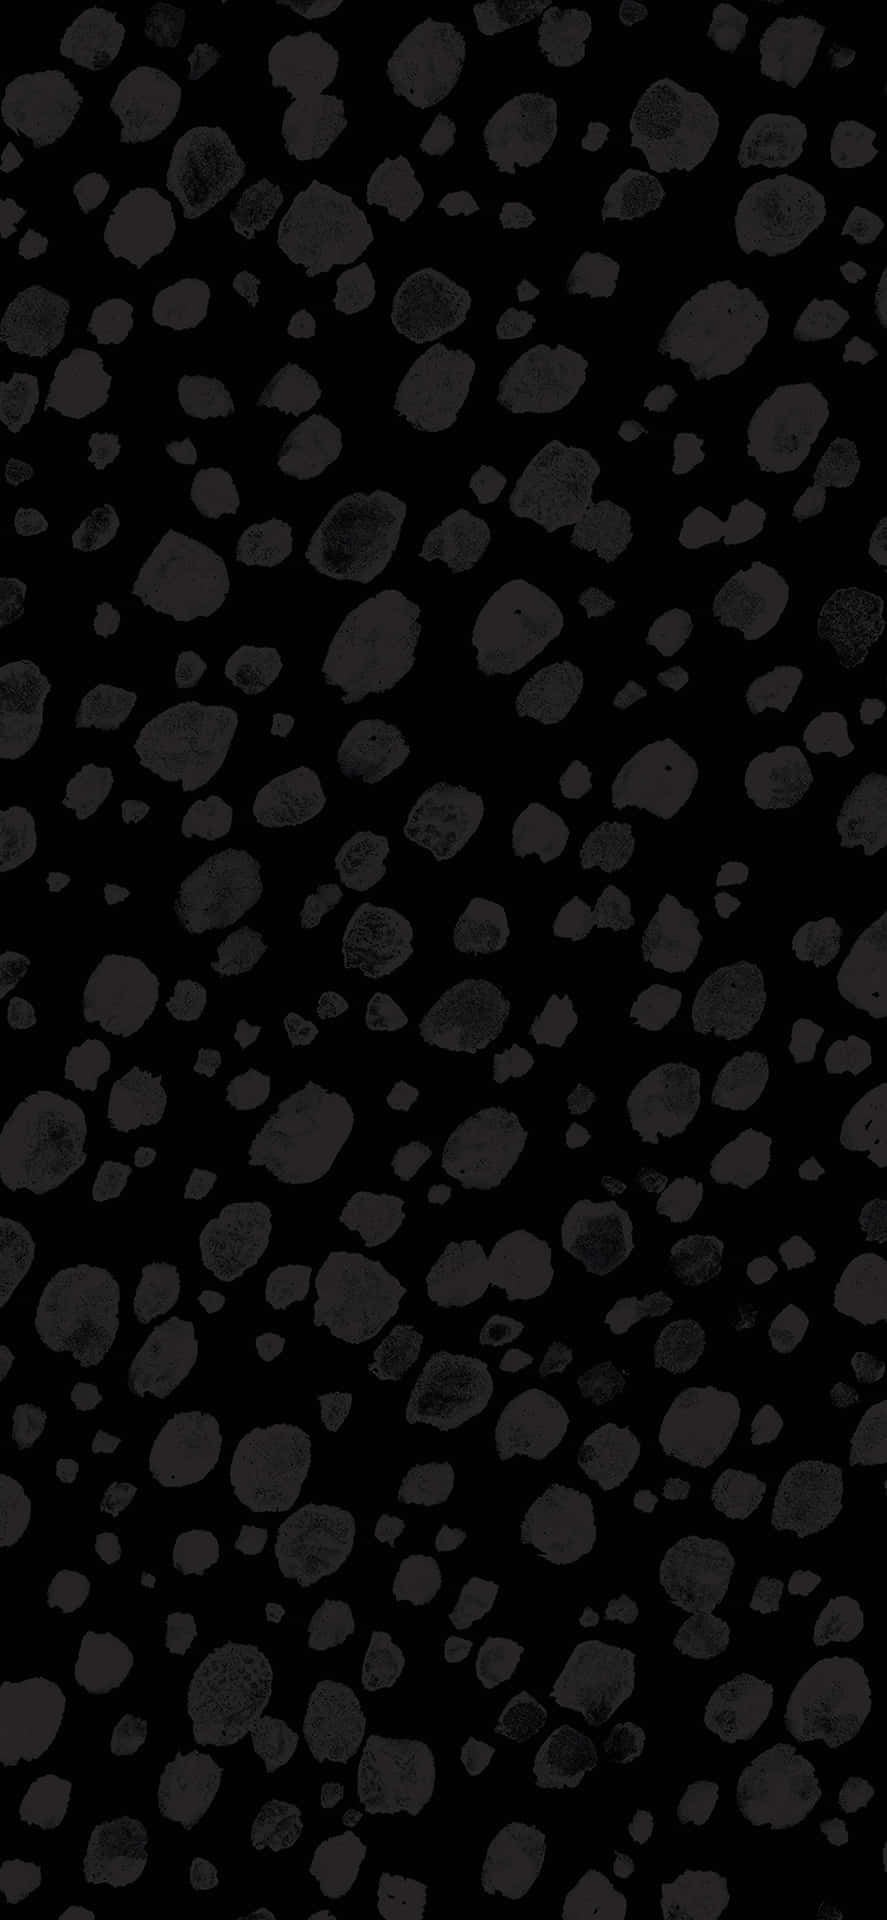 Black And White Pebbles On A Black Background Wallpaper